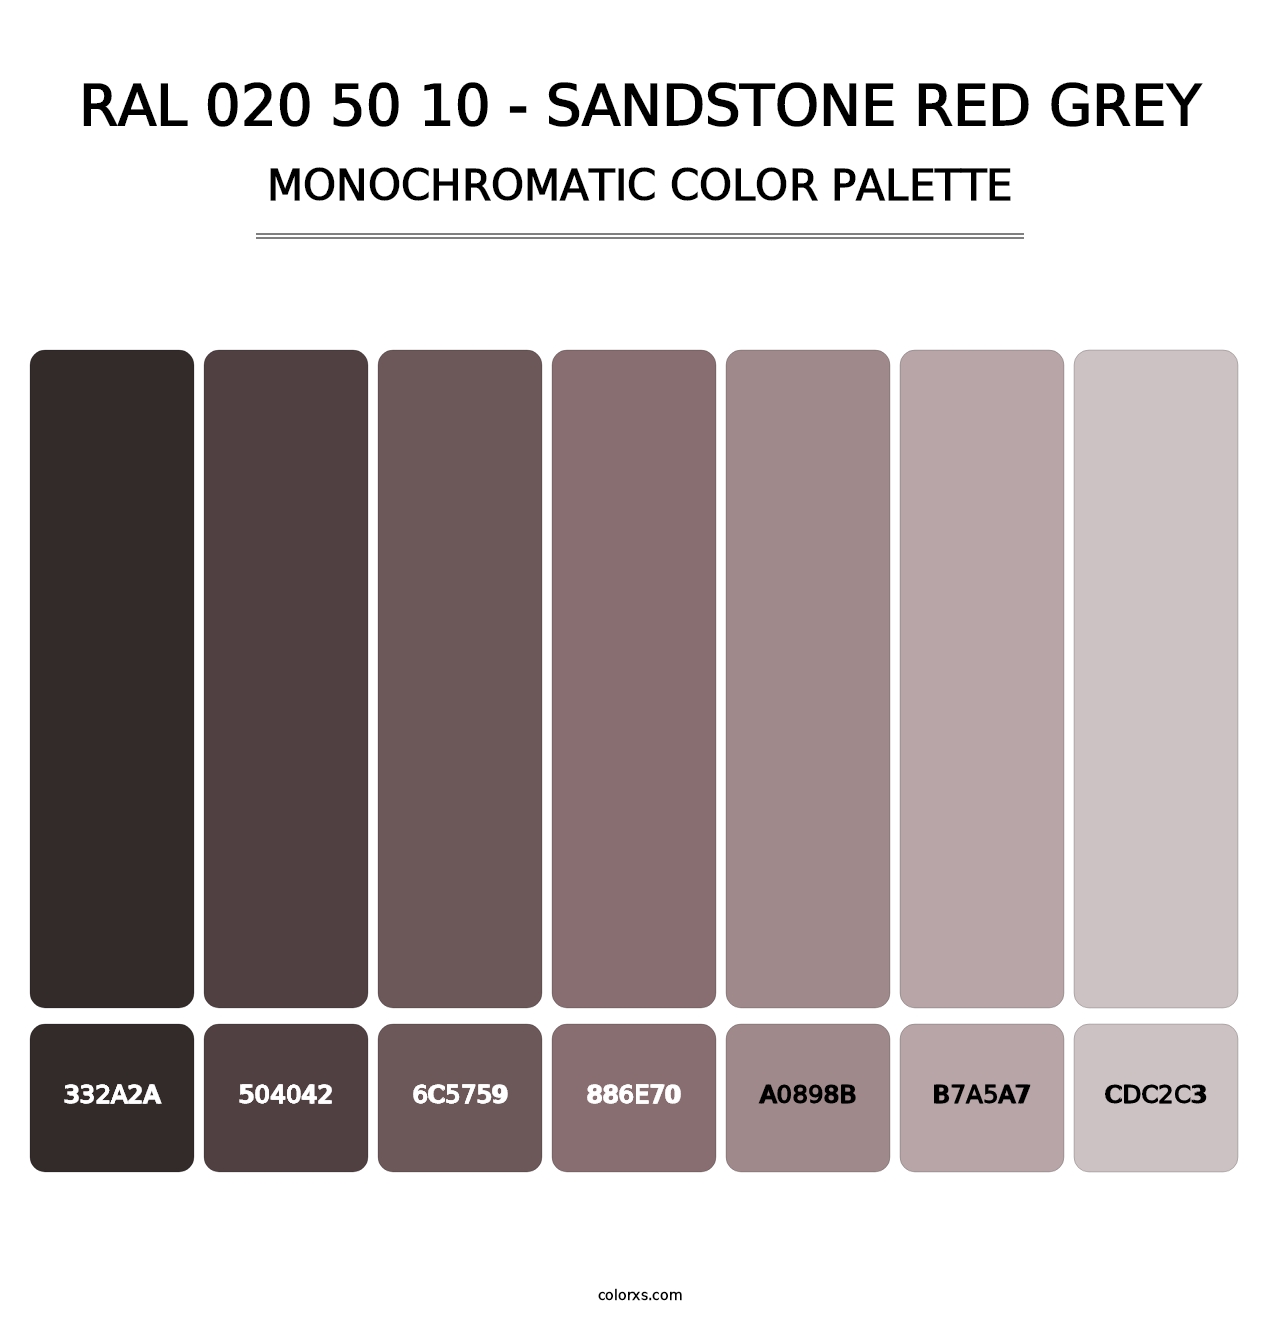 RAL 020 50 10 - Sandstone Red Grey - Monochromatic Color Palette